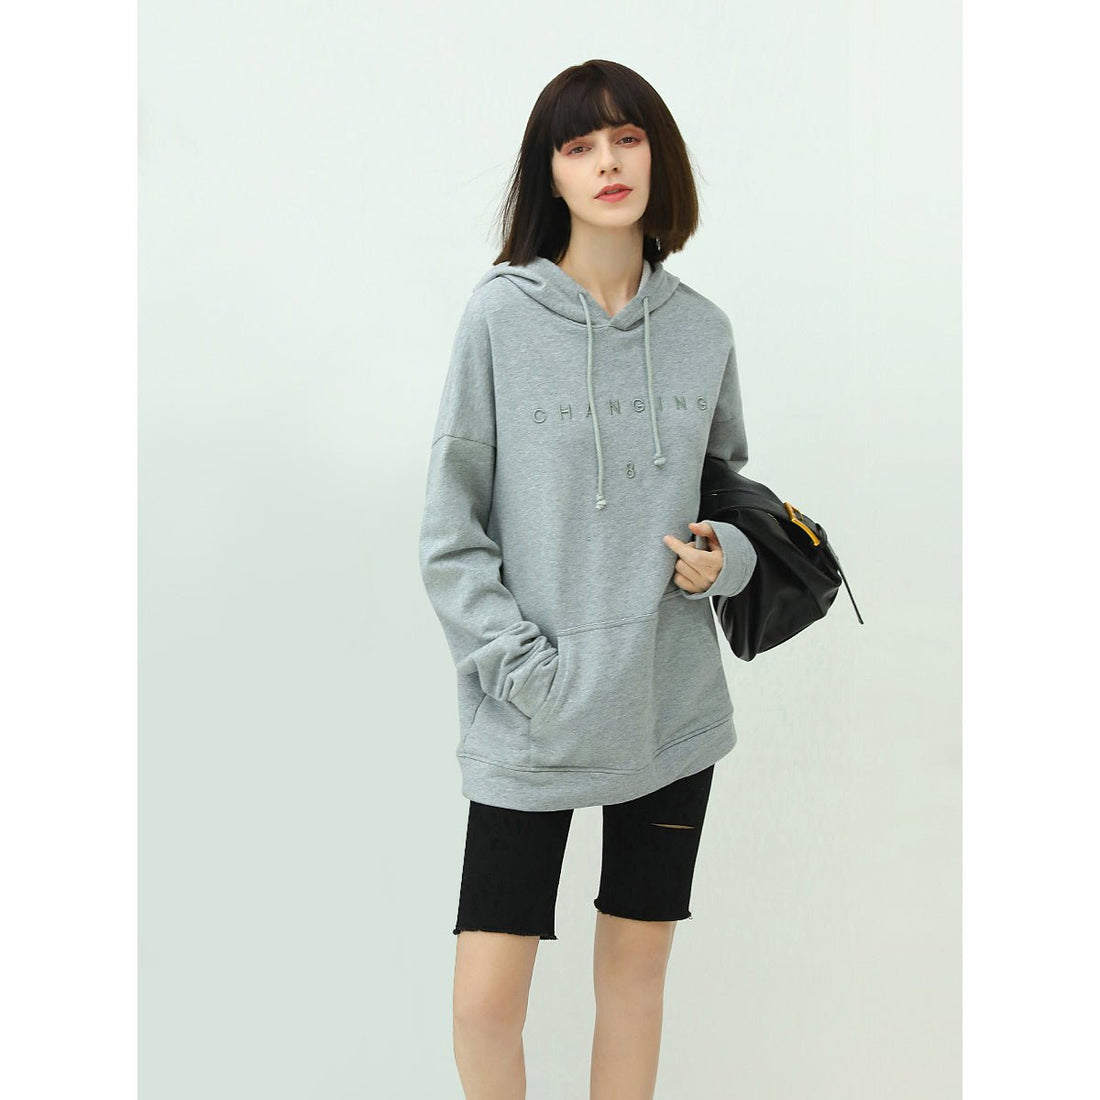 Relaxed Fit Slogan Embroidery Grey Hooded Sweater - 0cm